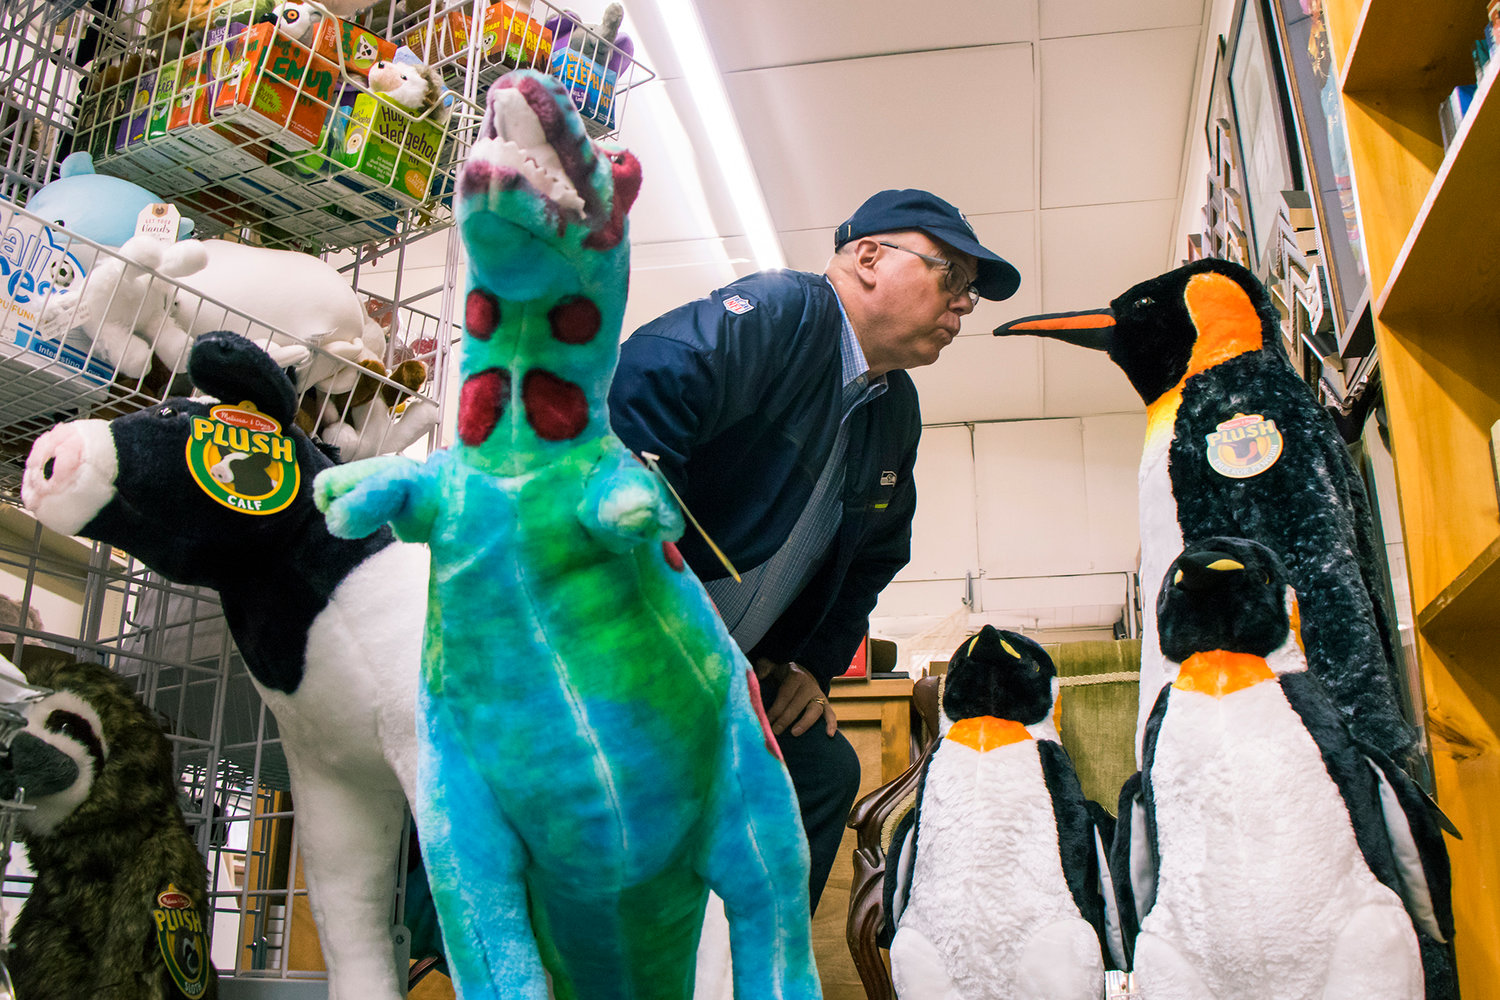 Owner David Hartz looks eye-to-eye with a stuffed penguin inside Book 'N' Brush Friday afternoon in Chehalis.